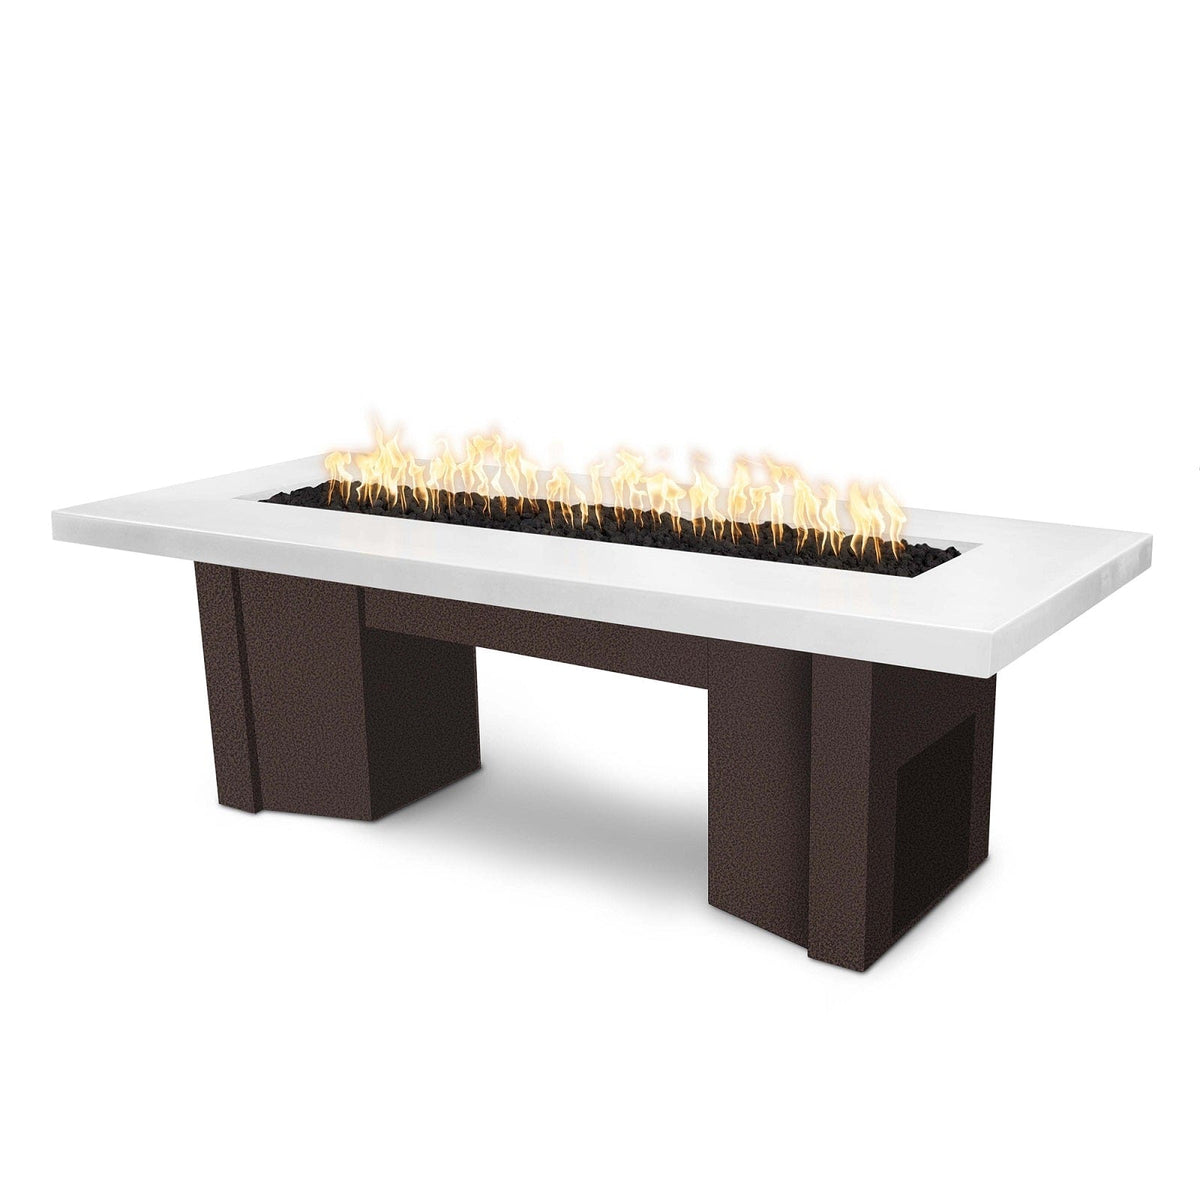 The Outdoor Plus Fire Features Limestone (-LIM) / Copper Vein Powder Coated Steel (-CPV) The Outdoor Plus 78&quot; Alameda Fire Table Smooth Concrete in Liquid Propane - Flame Sense System with Push Button Spark Igniter / OPT-ALMGFRC78FSEN-LP